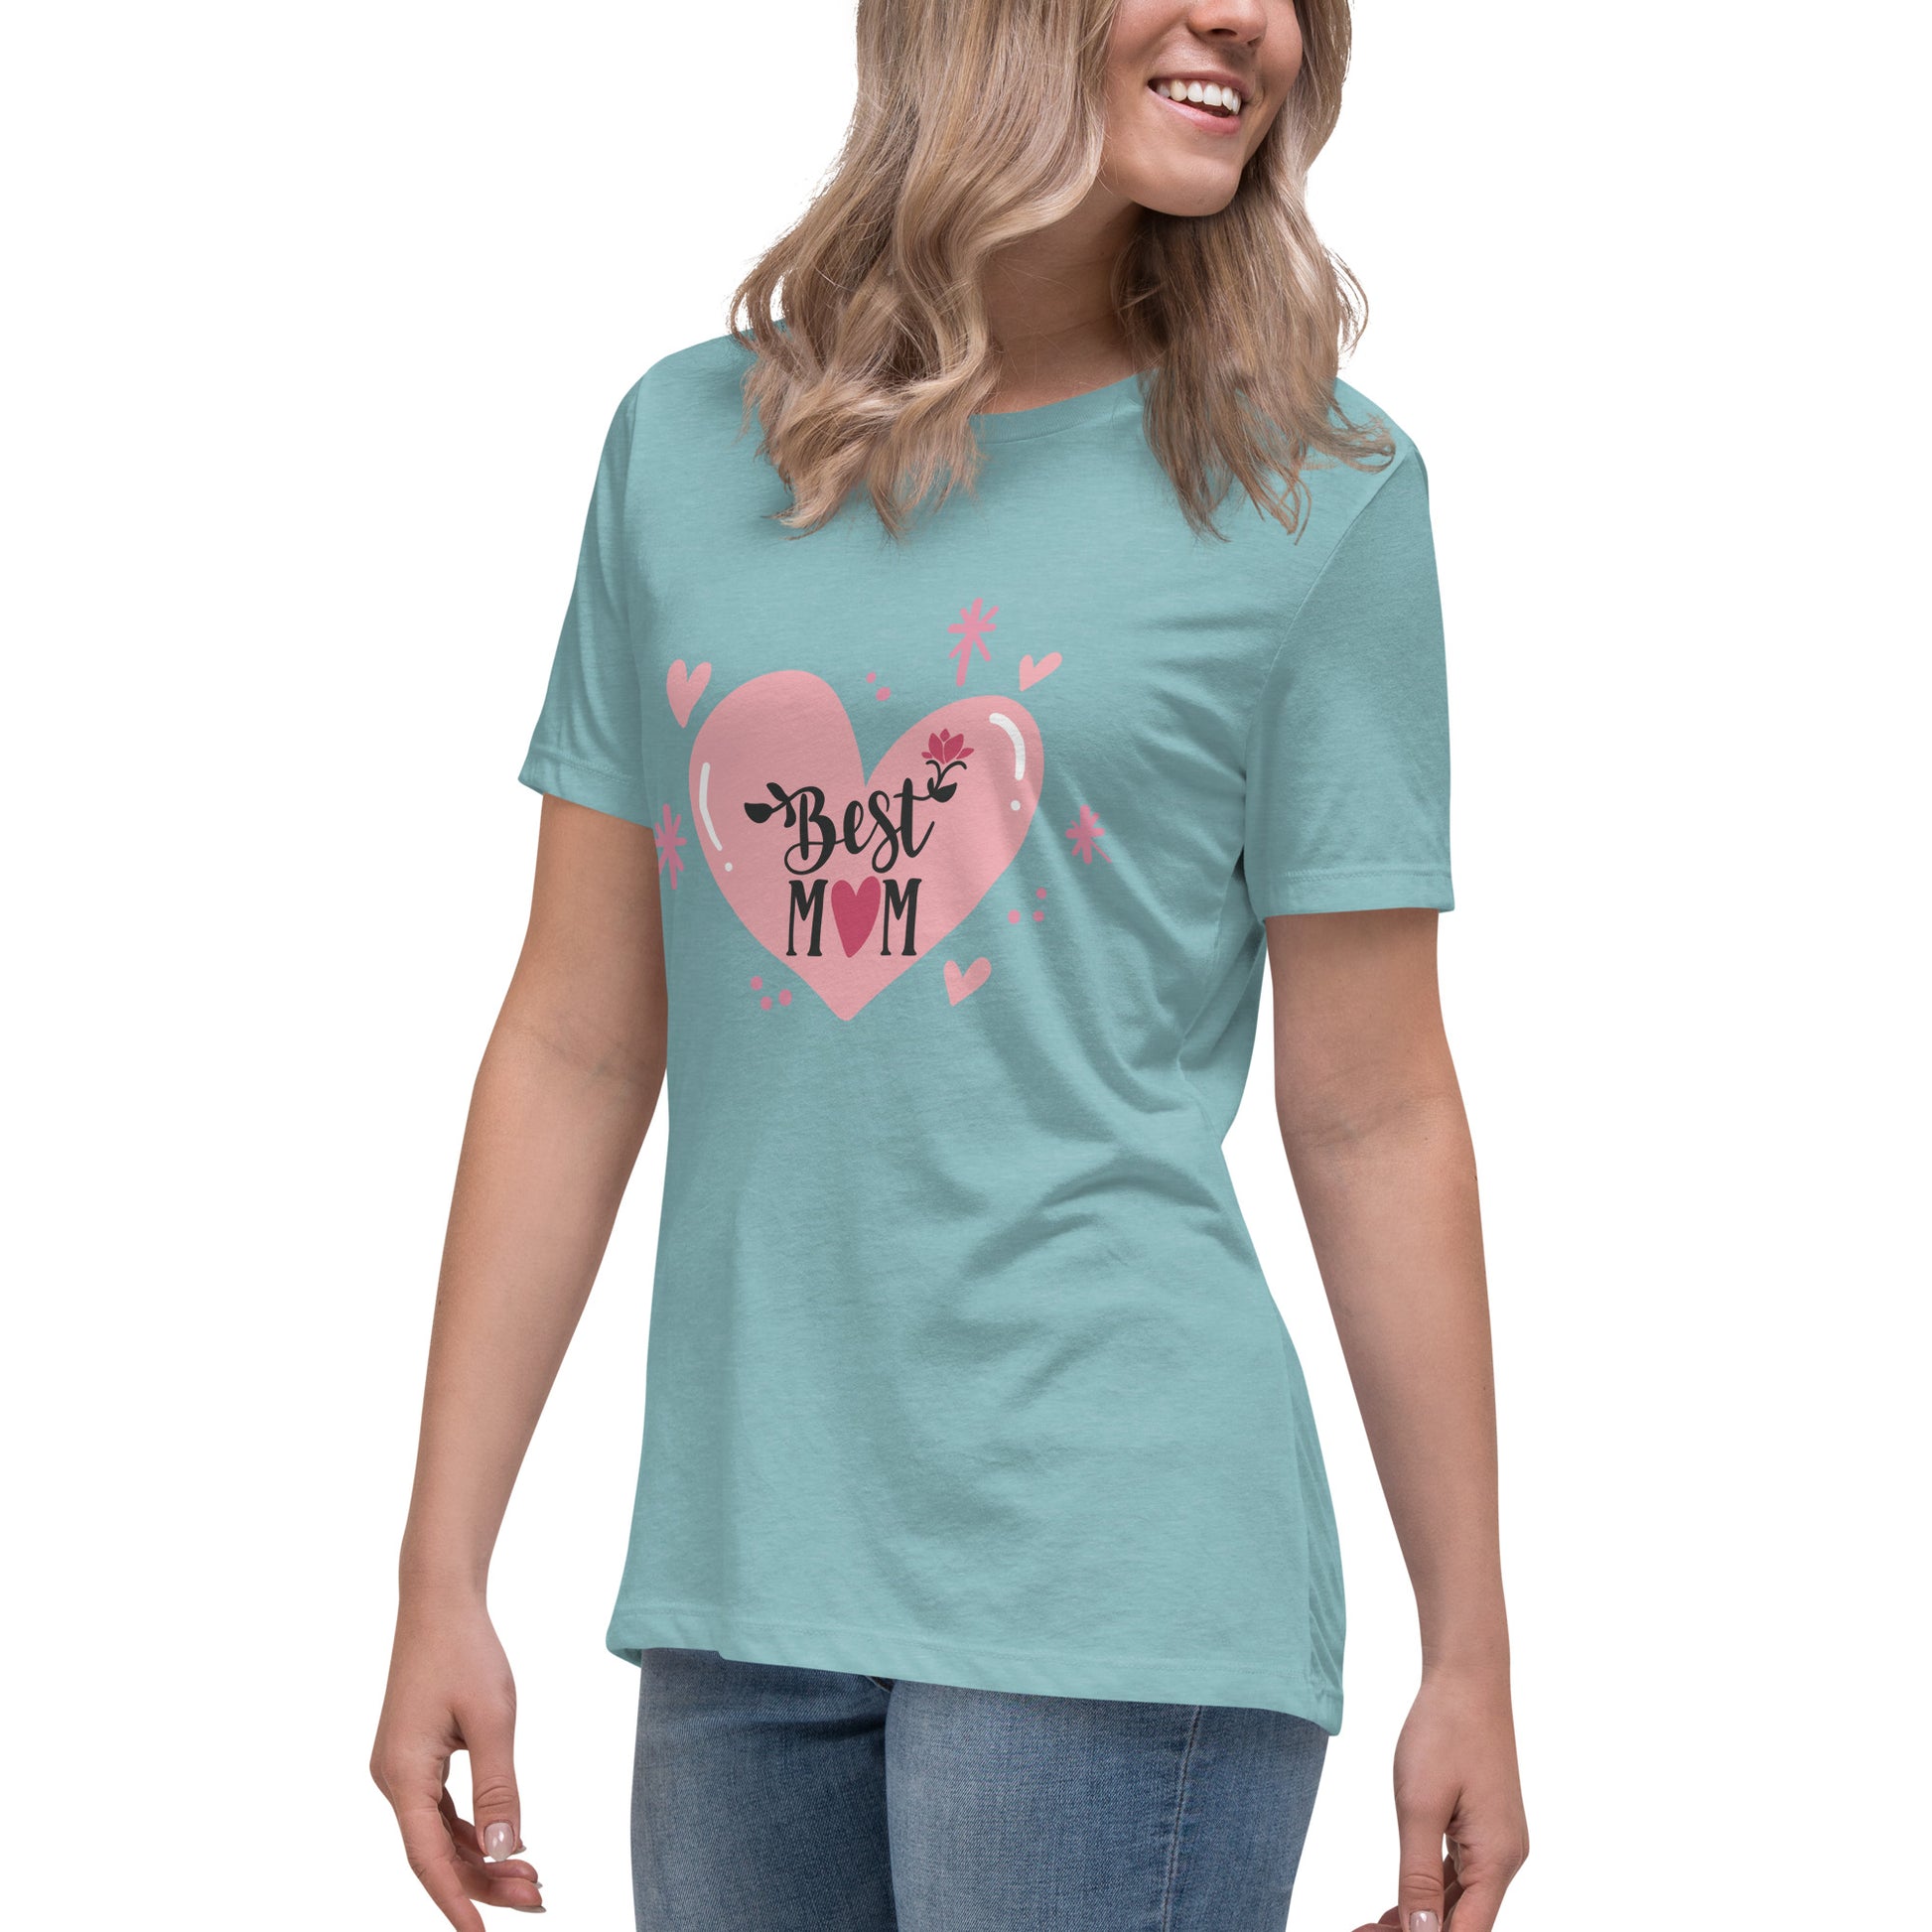 Women with blue lagoon t shirt with hart and text best MOM